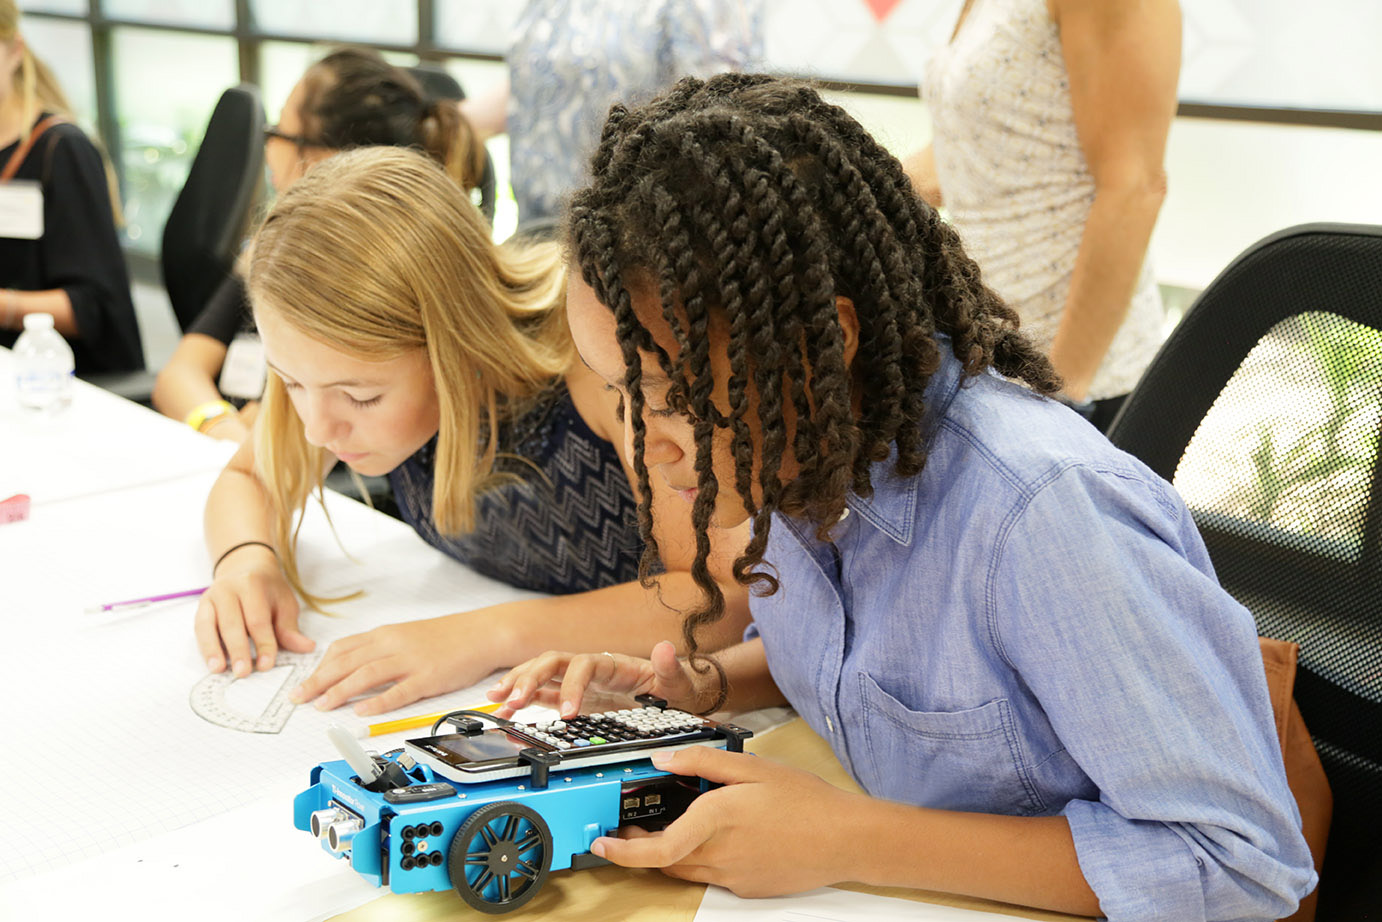 The TI-Innovator Rover gives students without any coding experience an on-ramp to robotics.